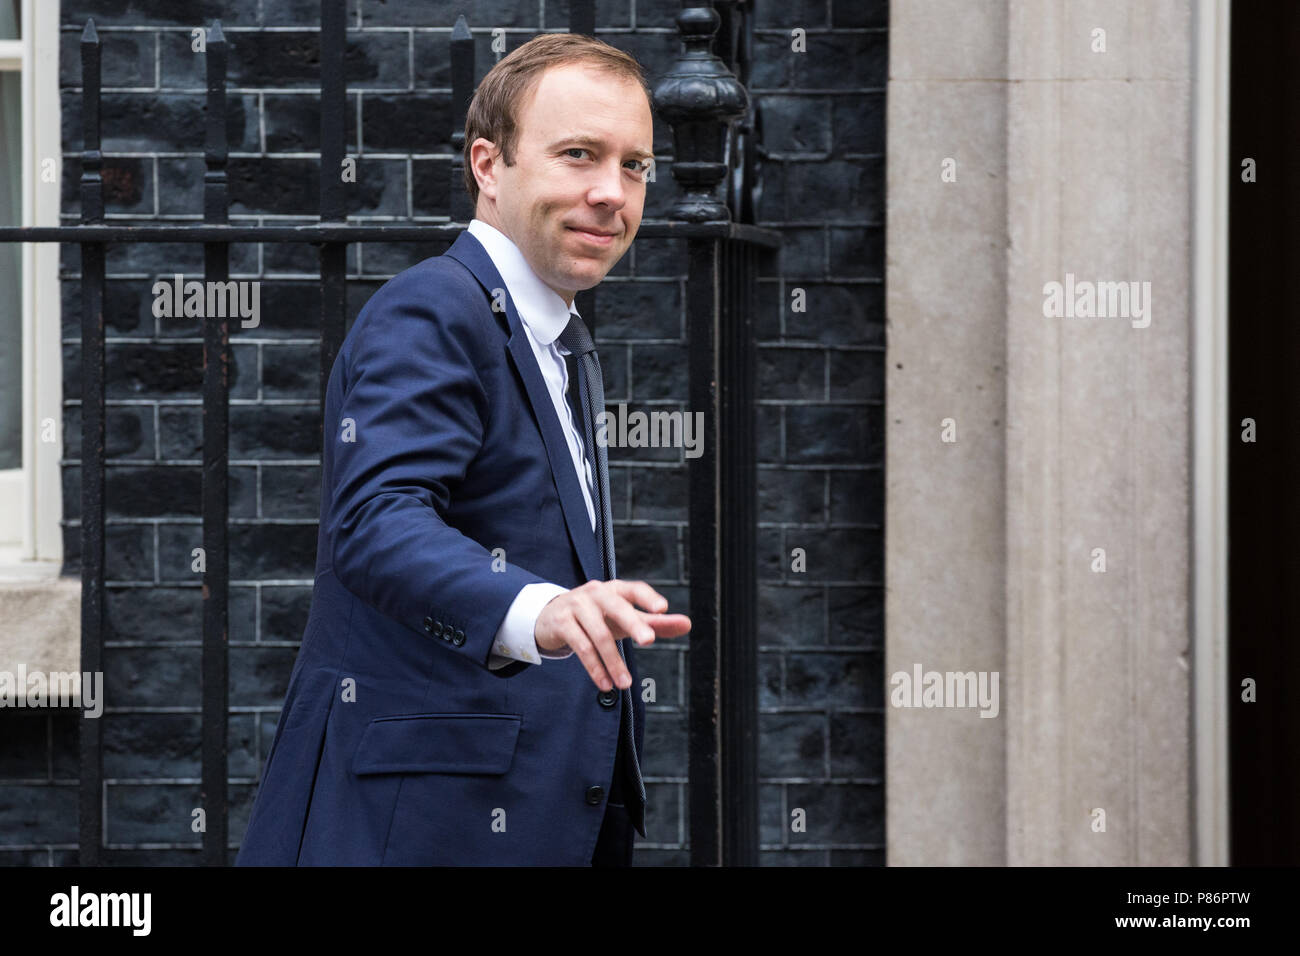 London, UK. 10th July, 2018. Matt Hancock MP, Secretary of State for Health and Social Care, arrives at 10 Downing Street for the first Cabinet meeting since the resignations as Ministers of David Davis MP and Boris Johnson MP. Credit: Mark Kerrison/Alamy Live News Stock Photo